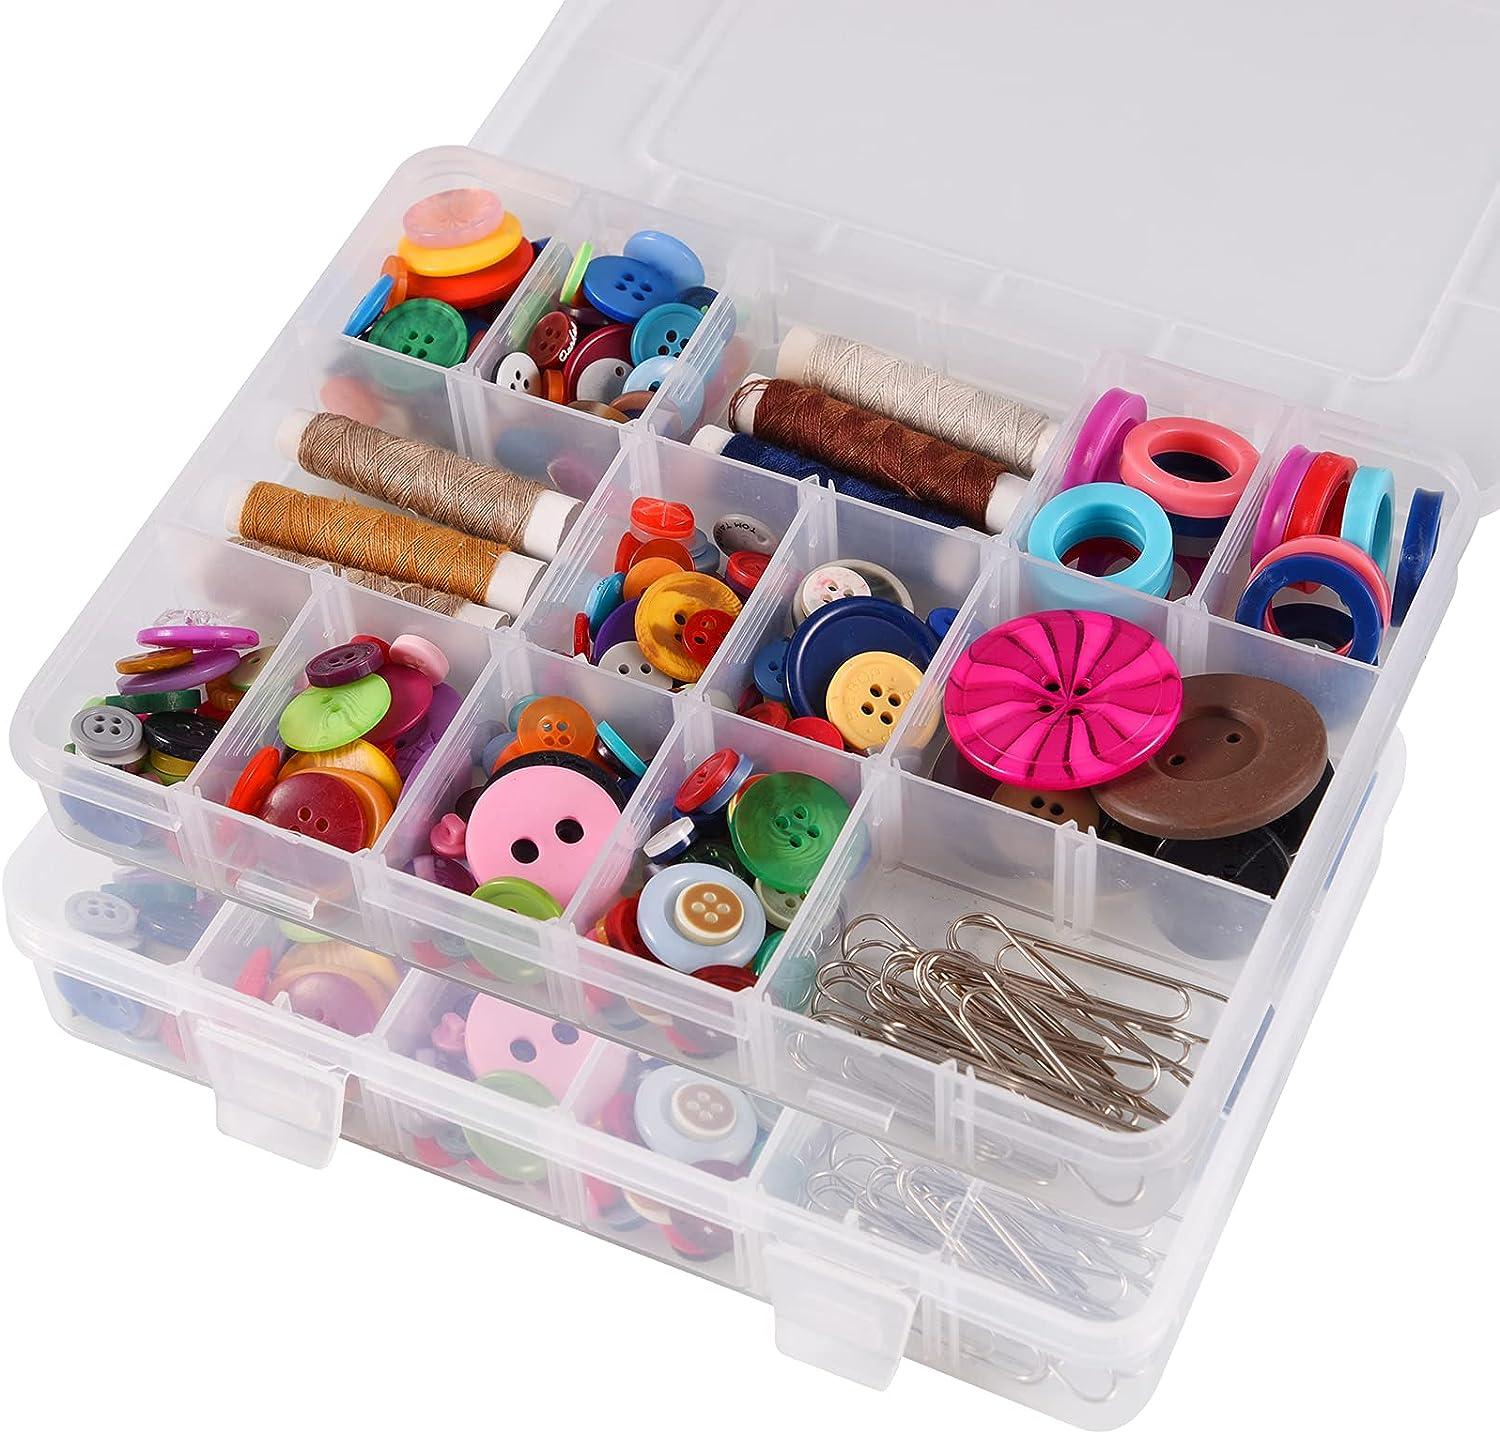 18 Grids Plastic Organizer Box with Dividers, Exptolii Clear Compartment Container  Storage for Beads Crafts Jewelry Fishing Tackles, Size 7.9 x 6.2 x 1.2 in  1x 18 Grids